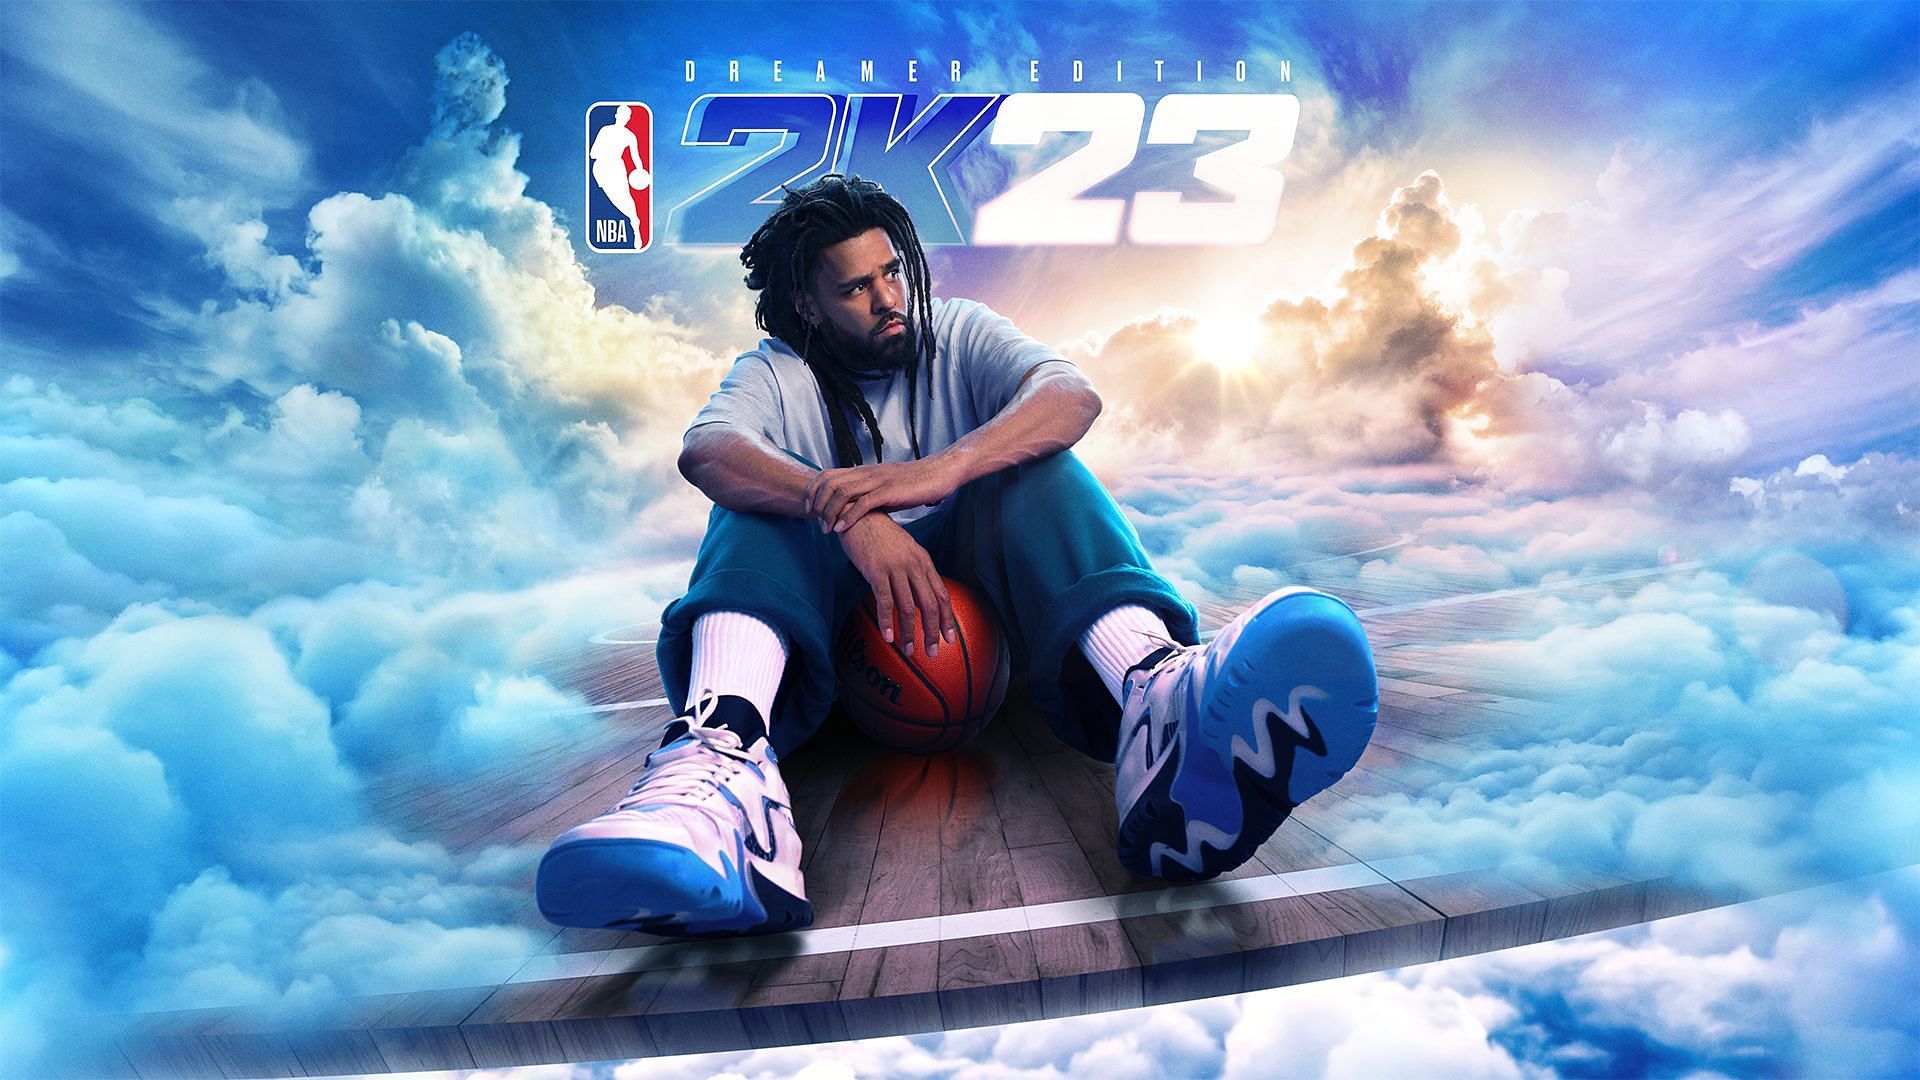 J. Cole on the cover of NBA 2K23: Dreamer Edition